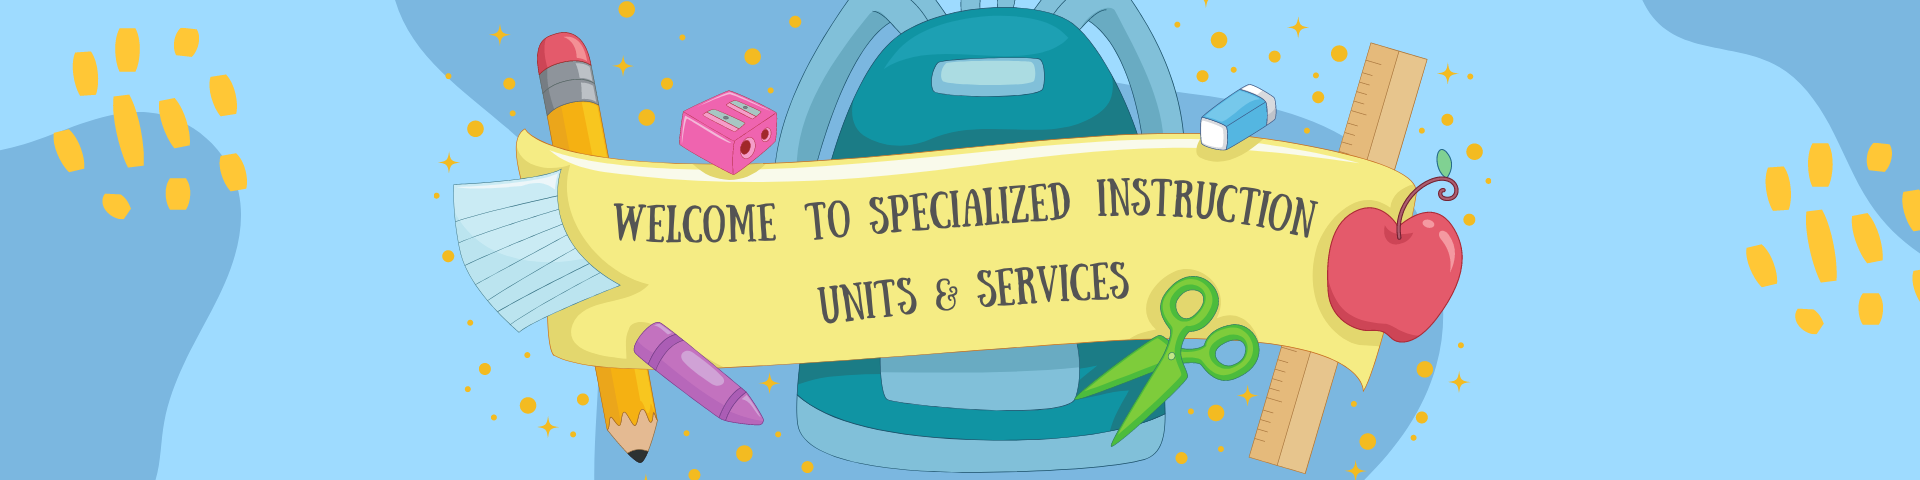 Specialized Instruction Units & Services